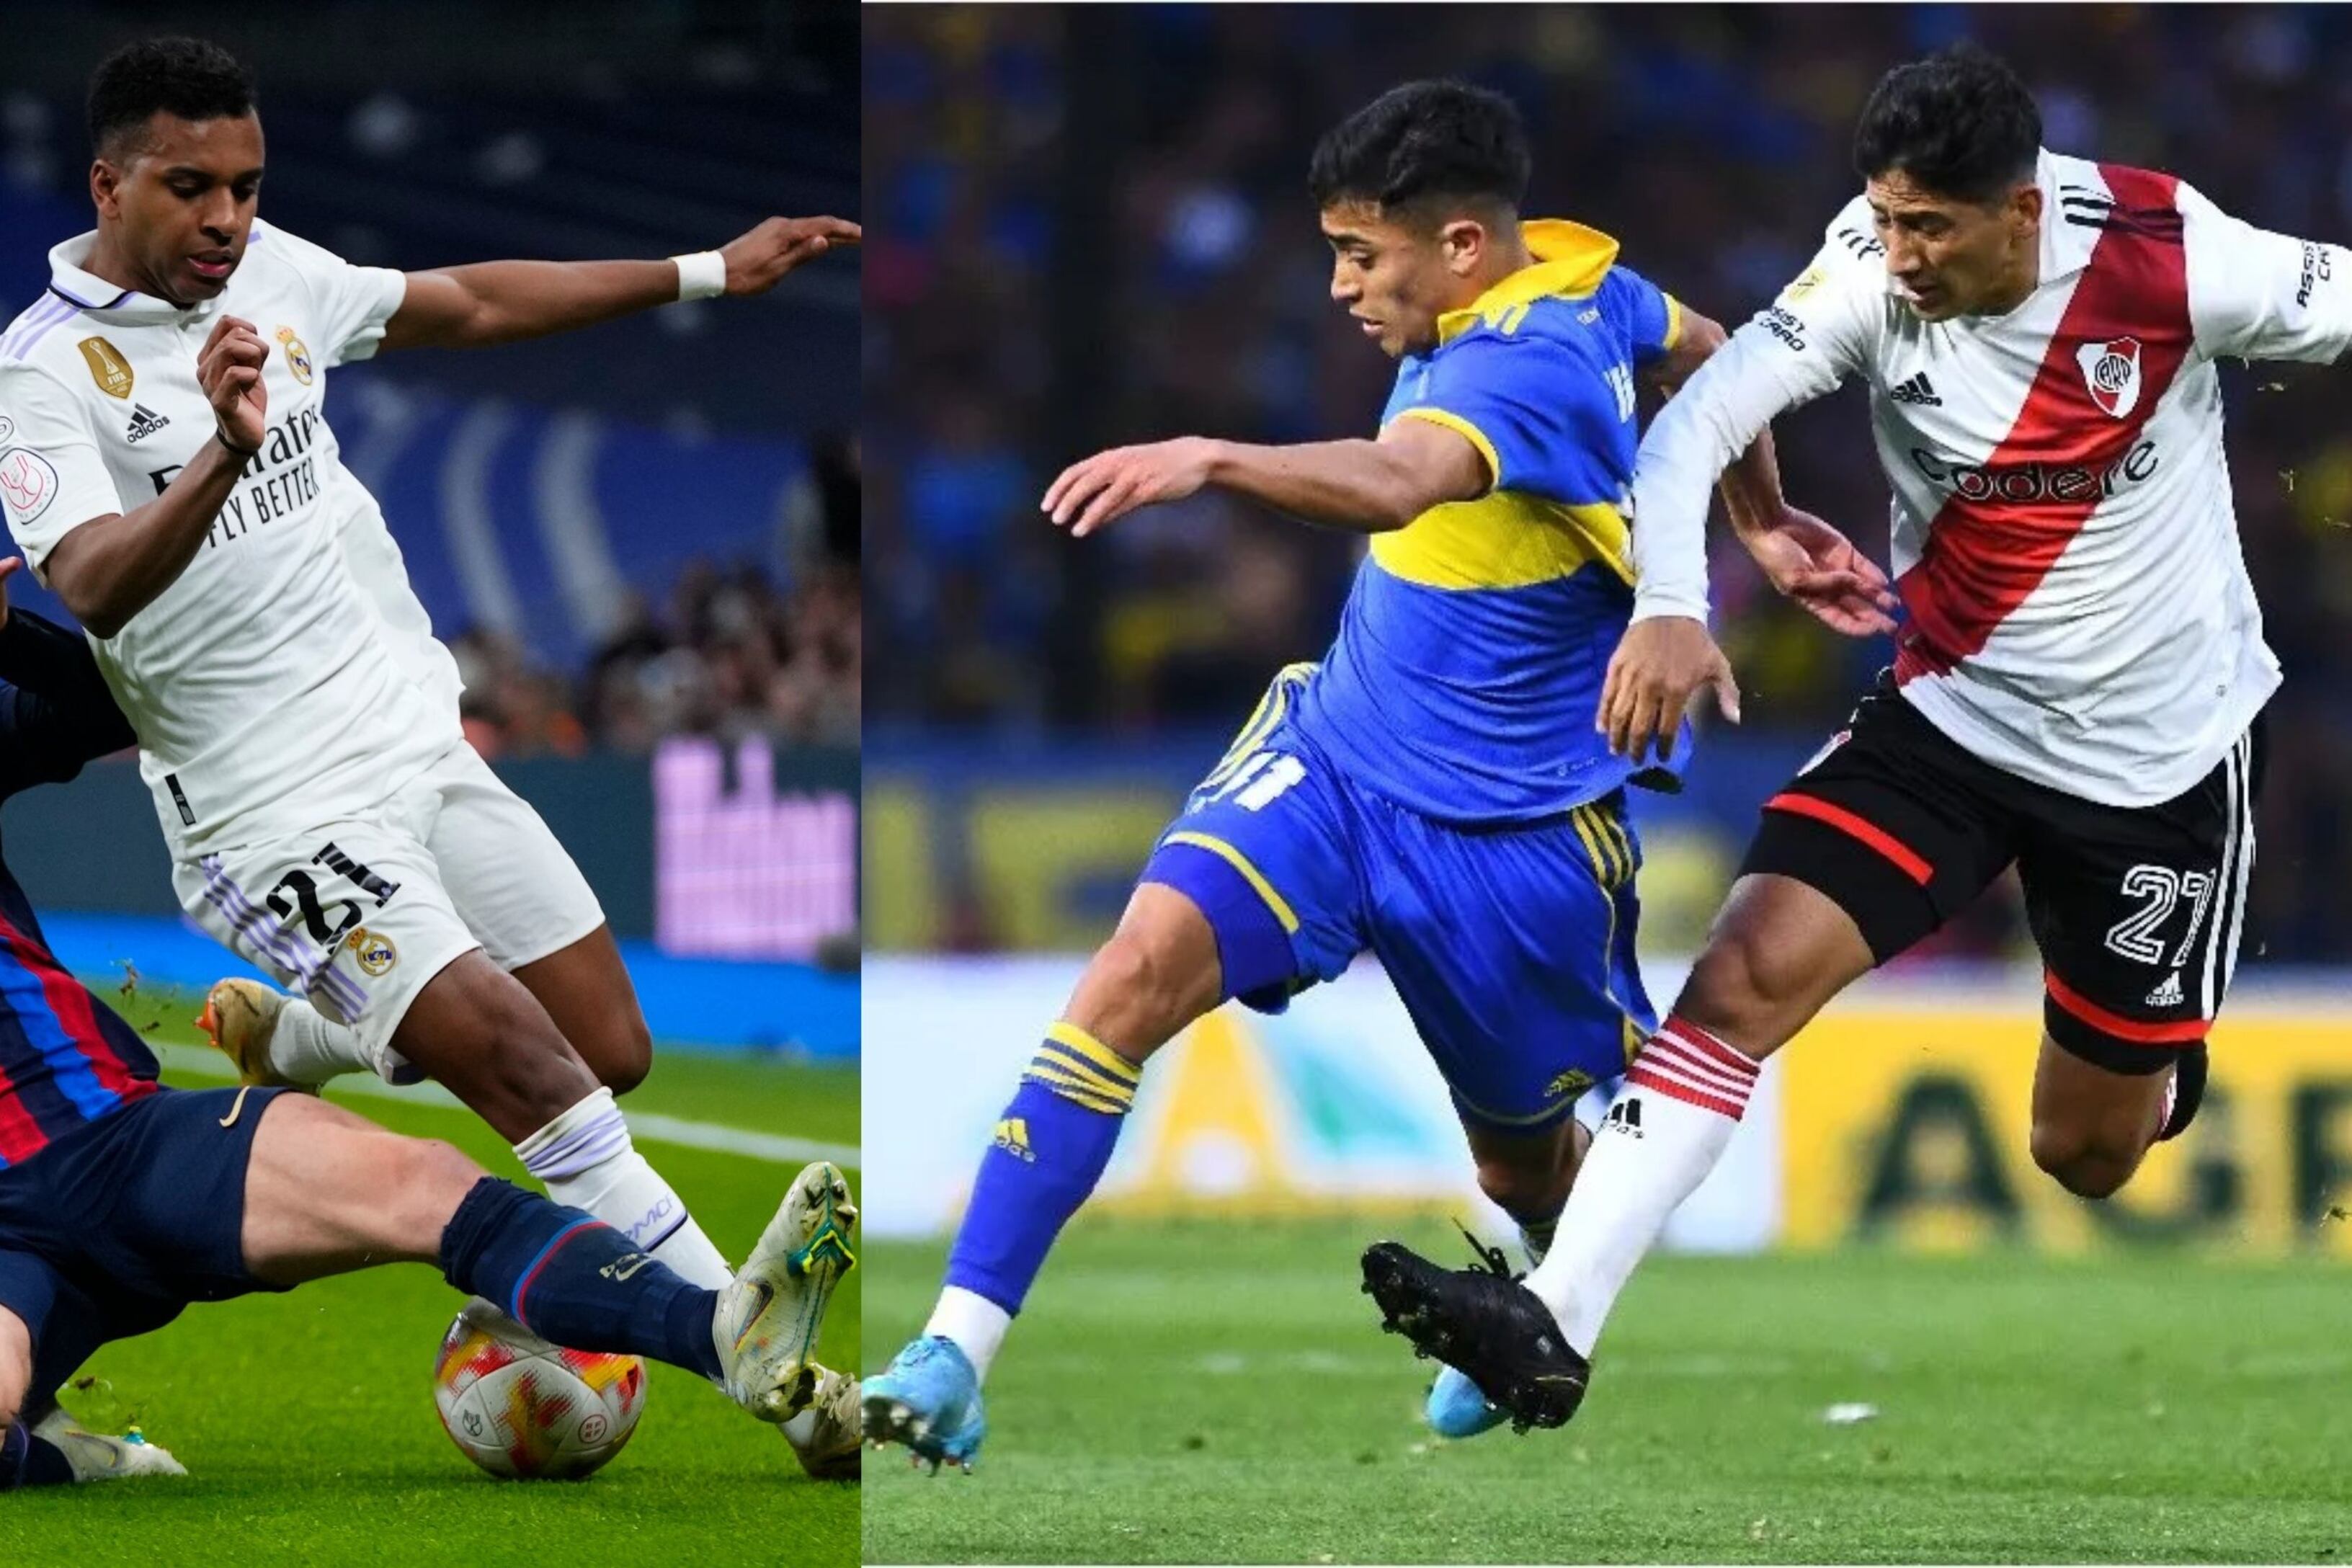 Not even Real Madrid vs Barcelona, you won't believe the cards on Boca vs River